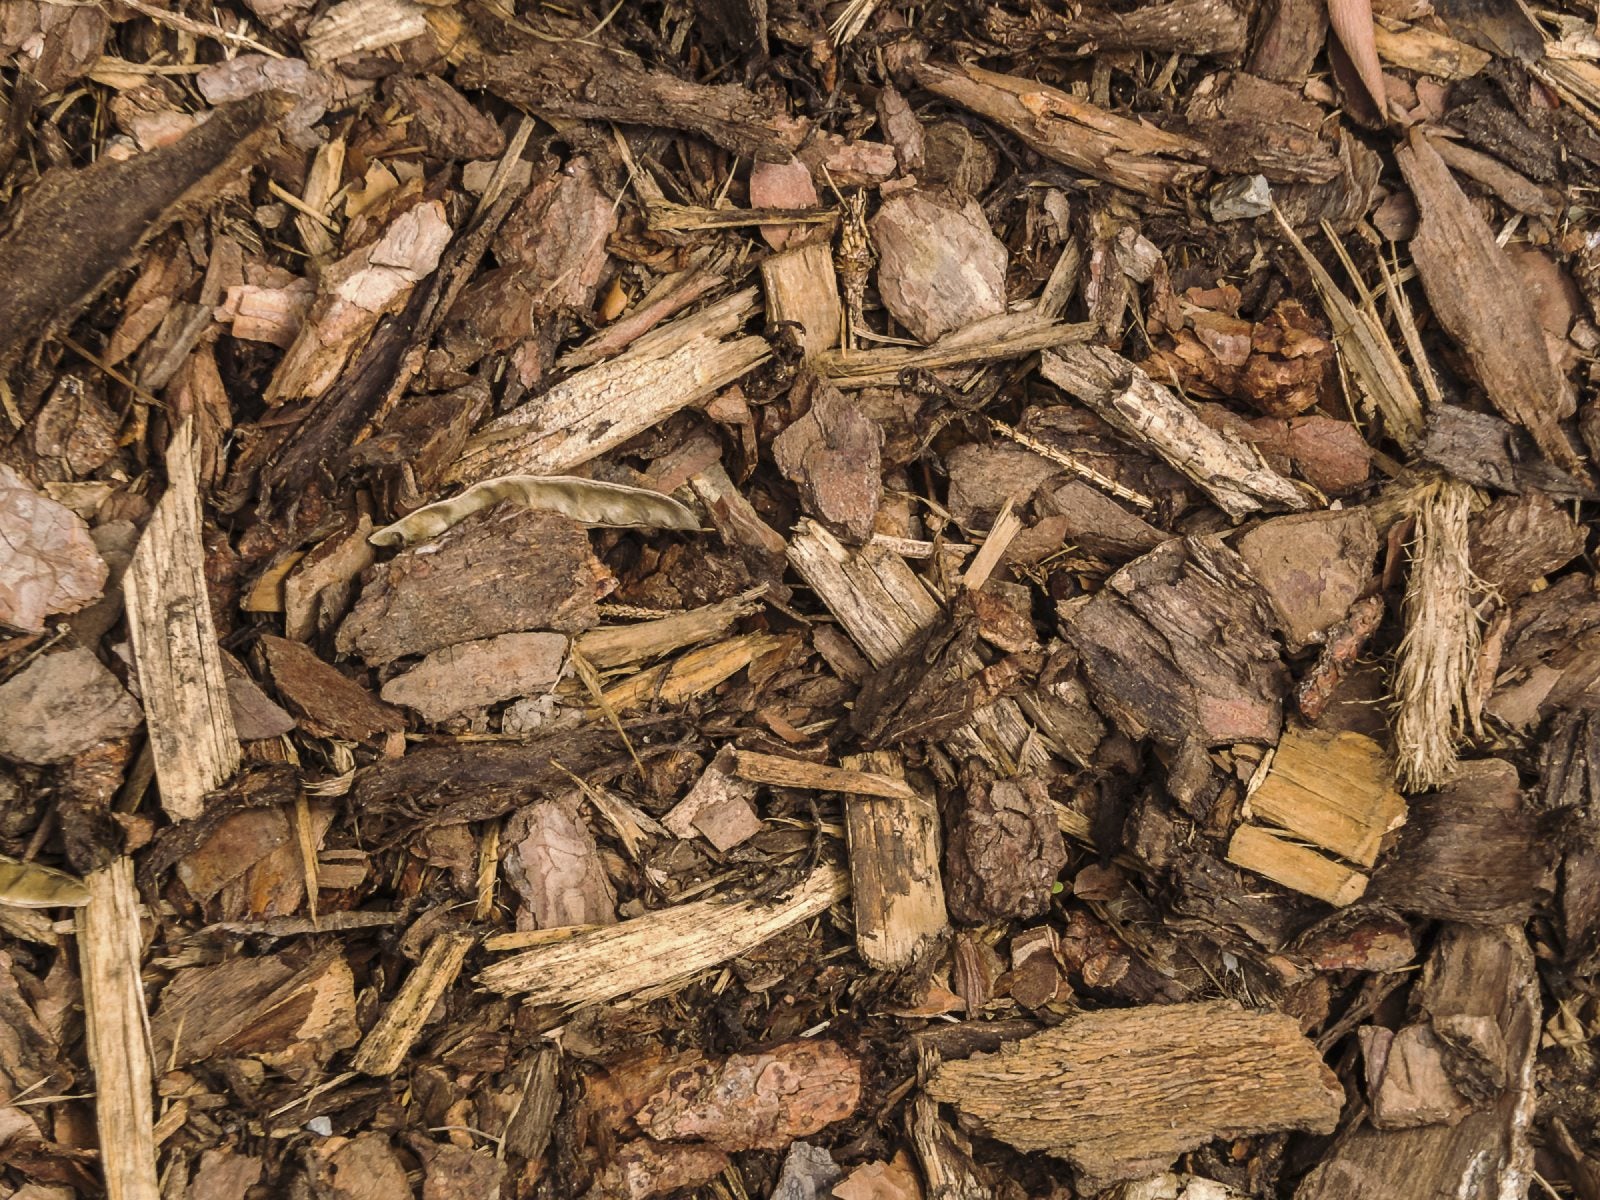 Benefits Of Wood Mulch - Are Wood Chips Good Mulch For Gardens